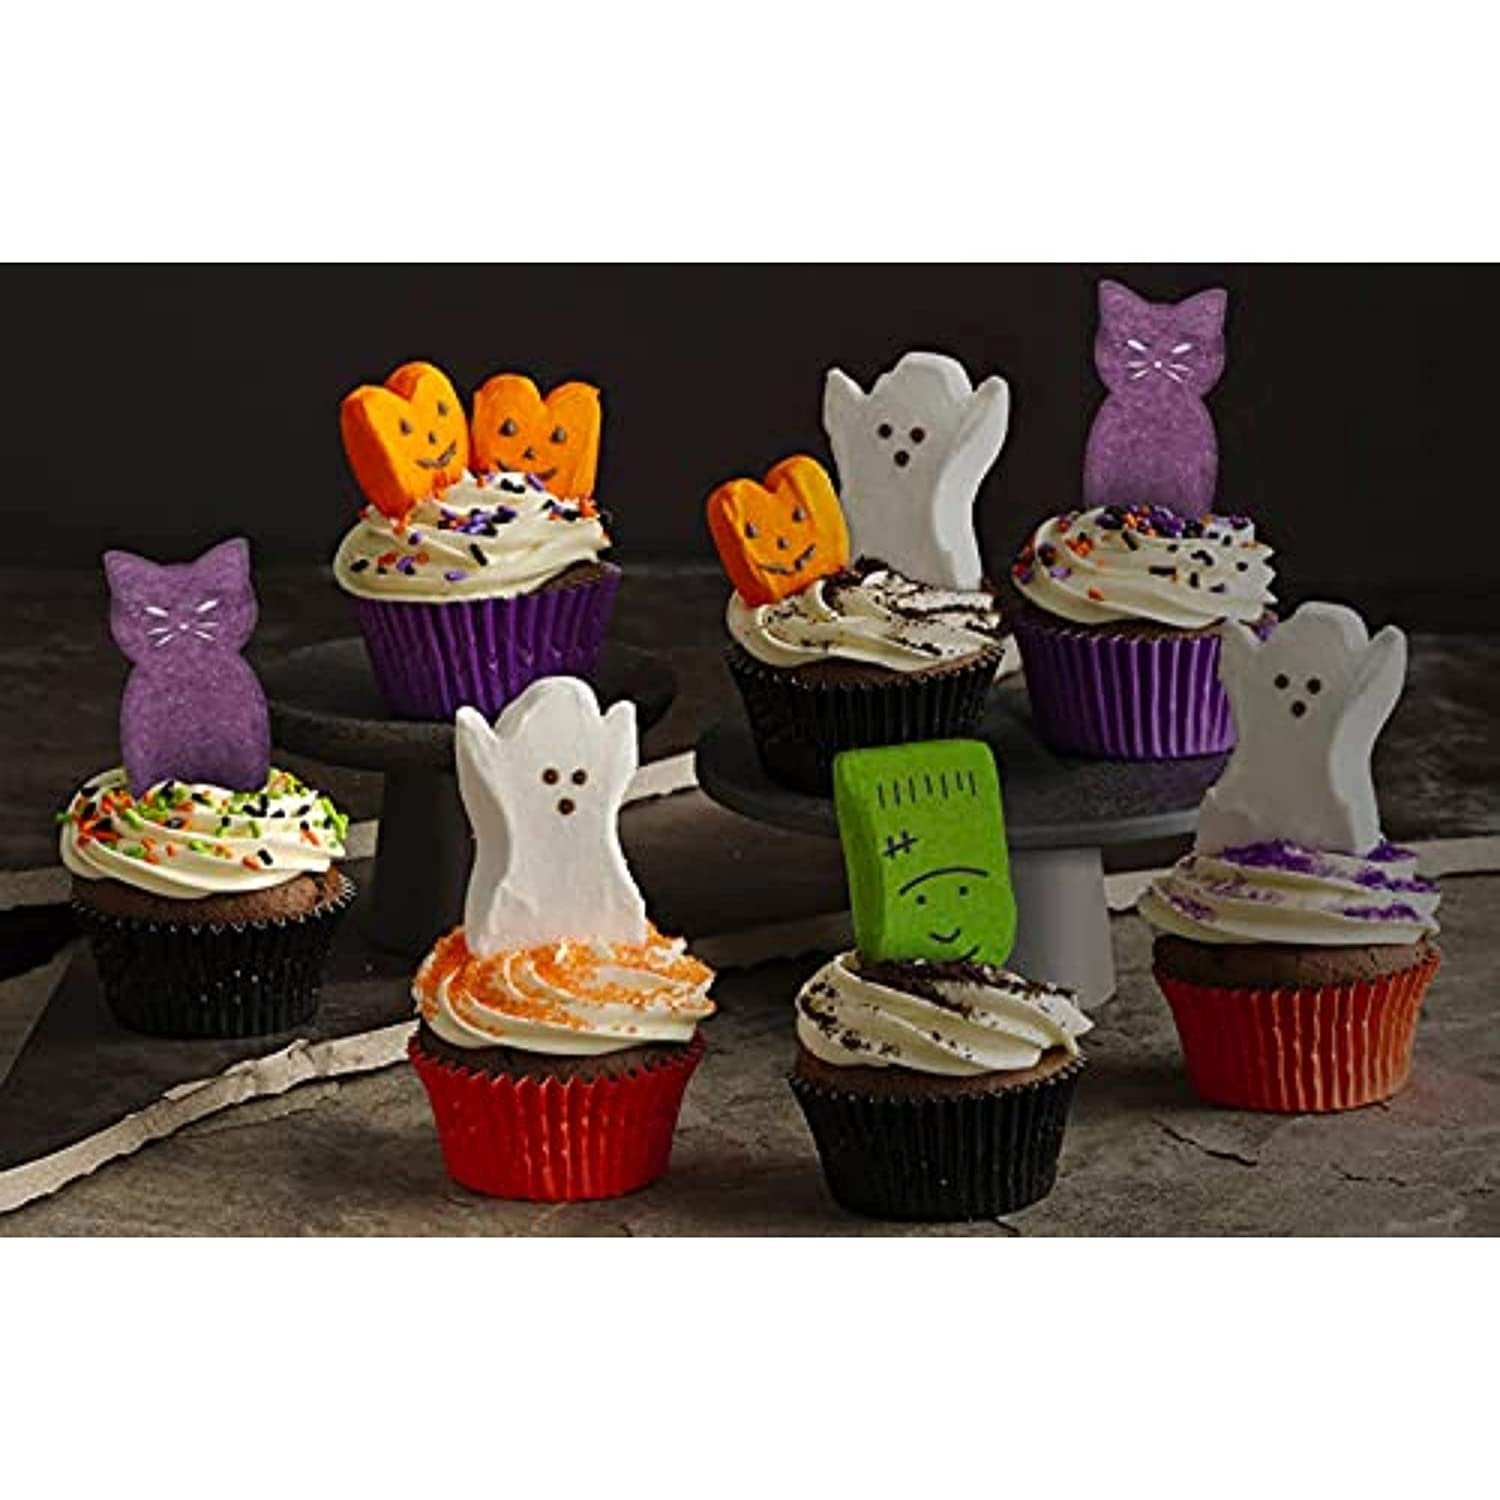 Halloween Candy Exclusive! Peeps Marshmallow Monsters! Delicious, Soft, And Chewy! (2 Pack)